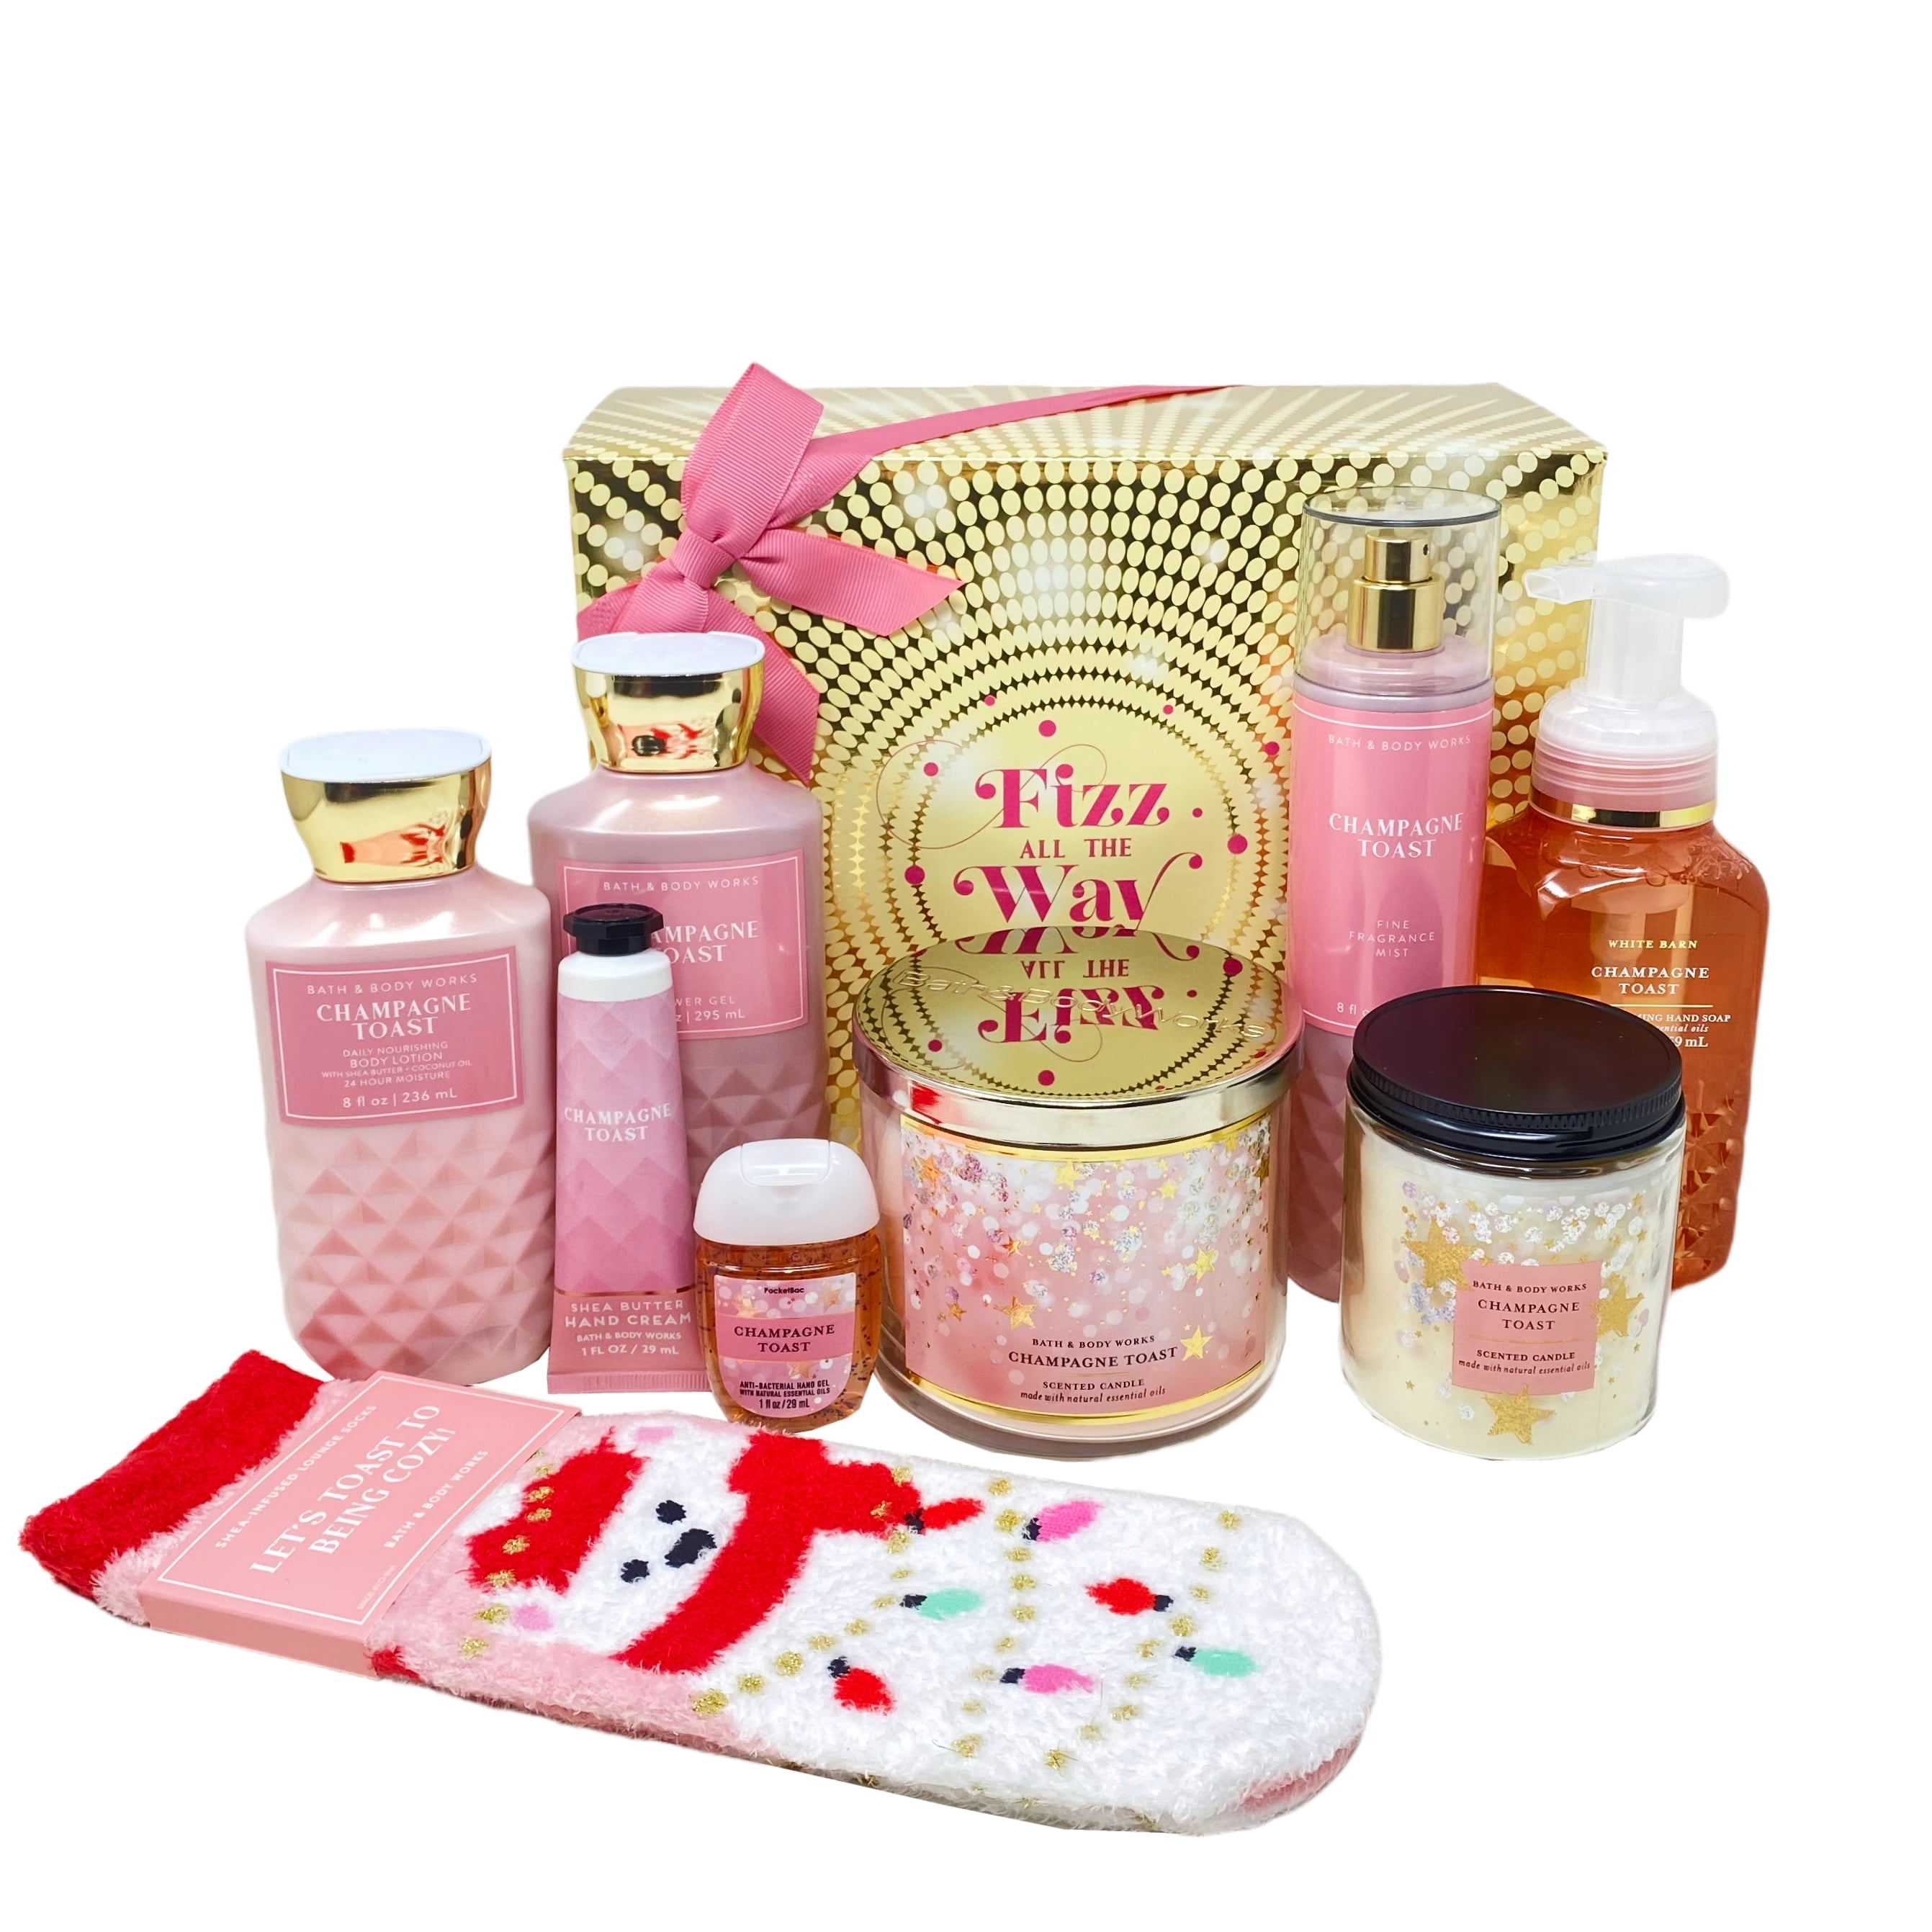 Champagne Toast 5 Piece Gift Set - Includes Fine Fragrance Mist, Ultimate  Hydration Body Cream, Gentle Gel Hand Soap, Shea Butter Hand Cream, and  Gift